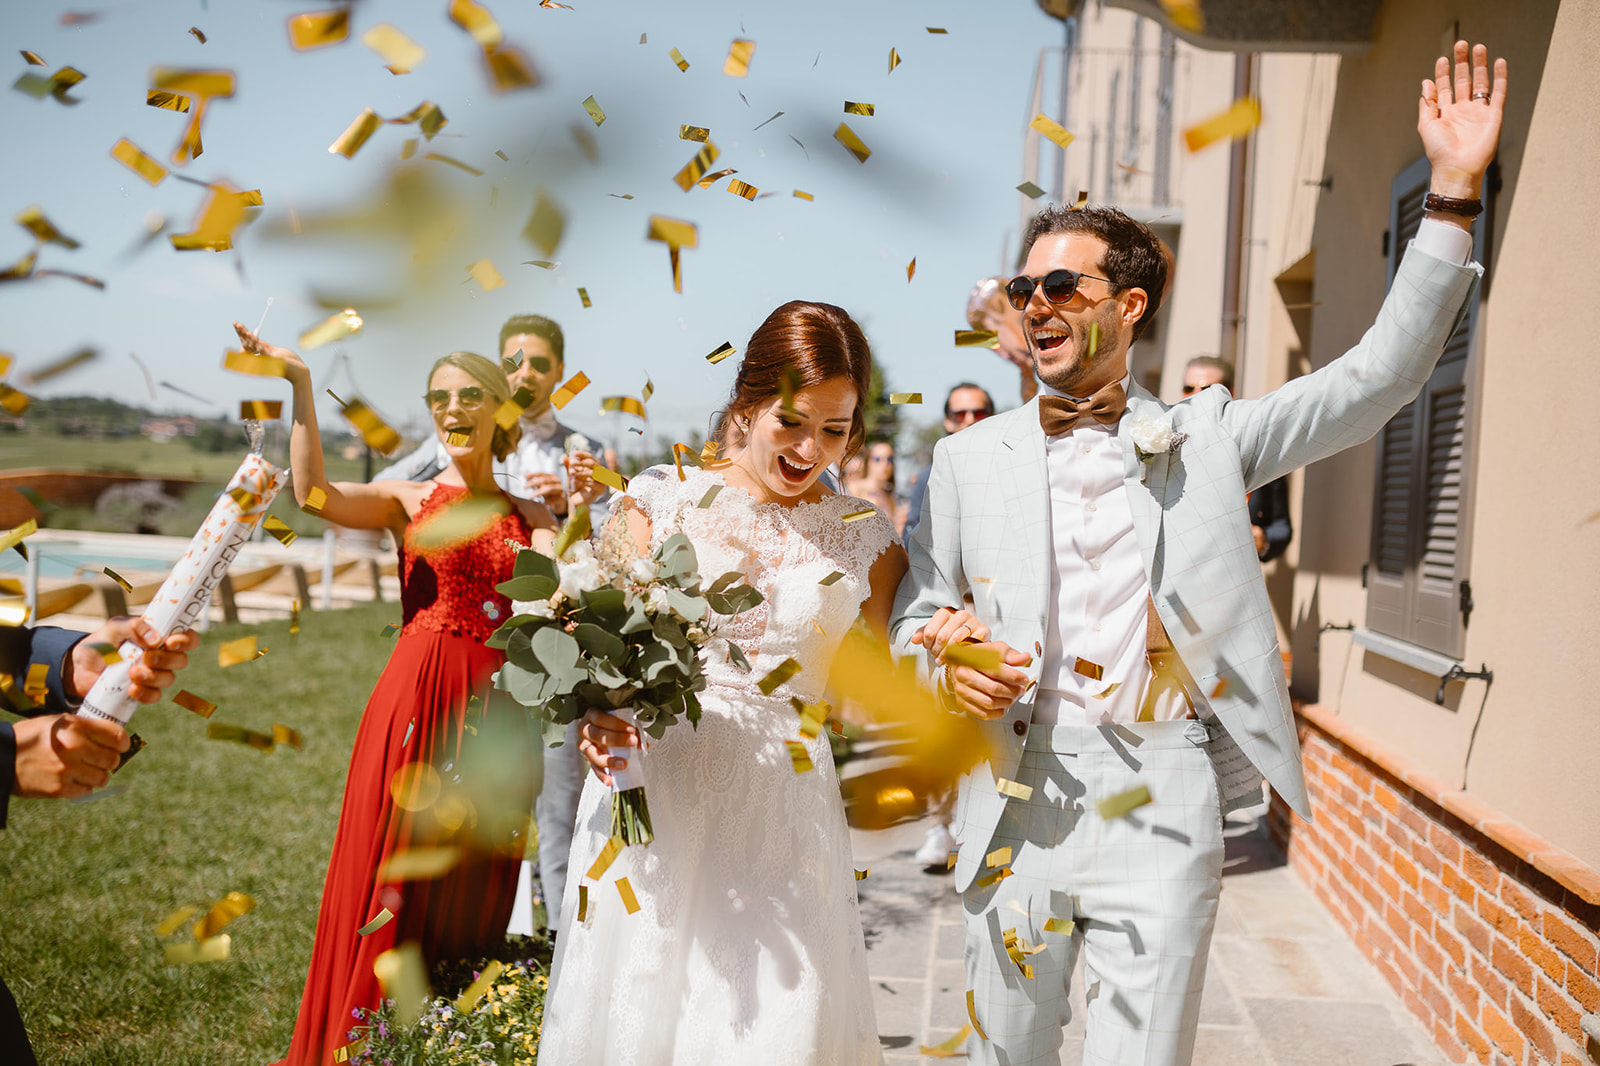 Bride and groom entrance with gold confetti